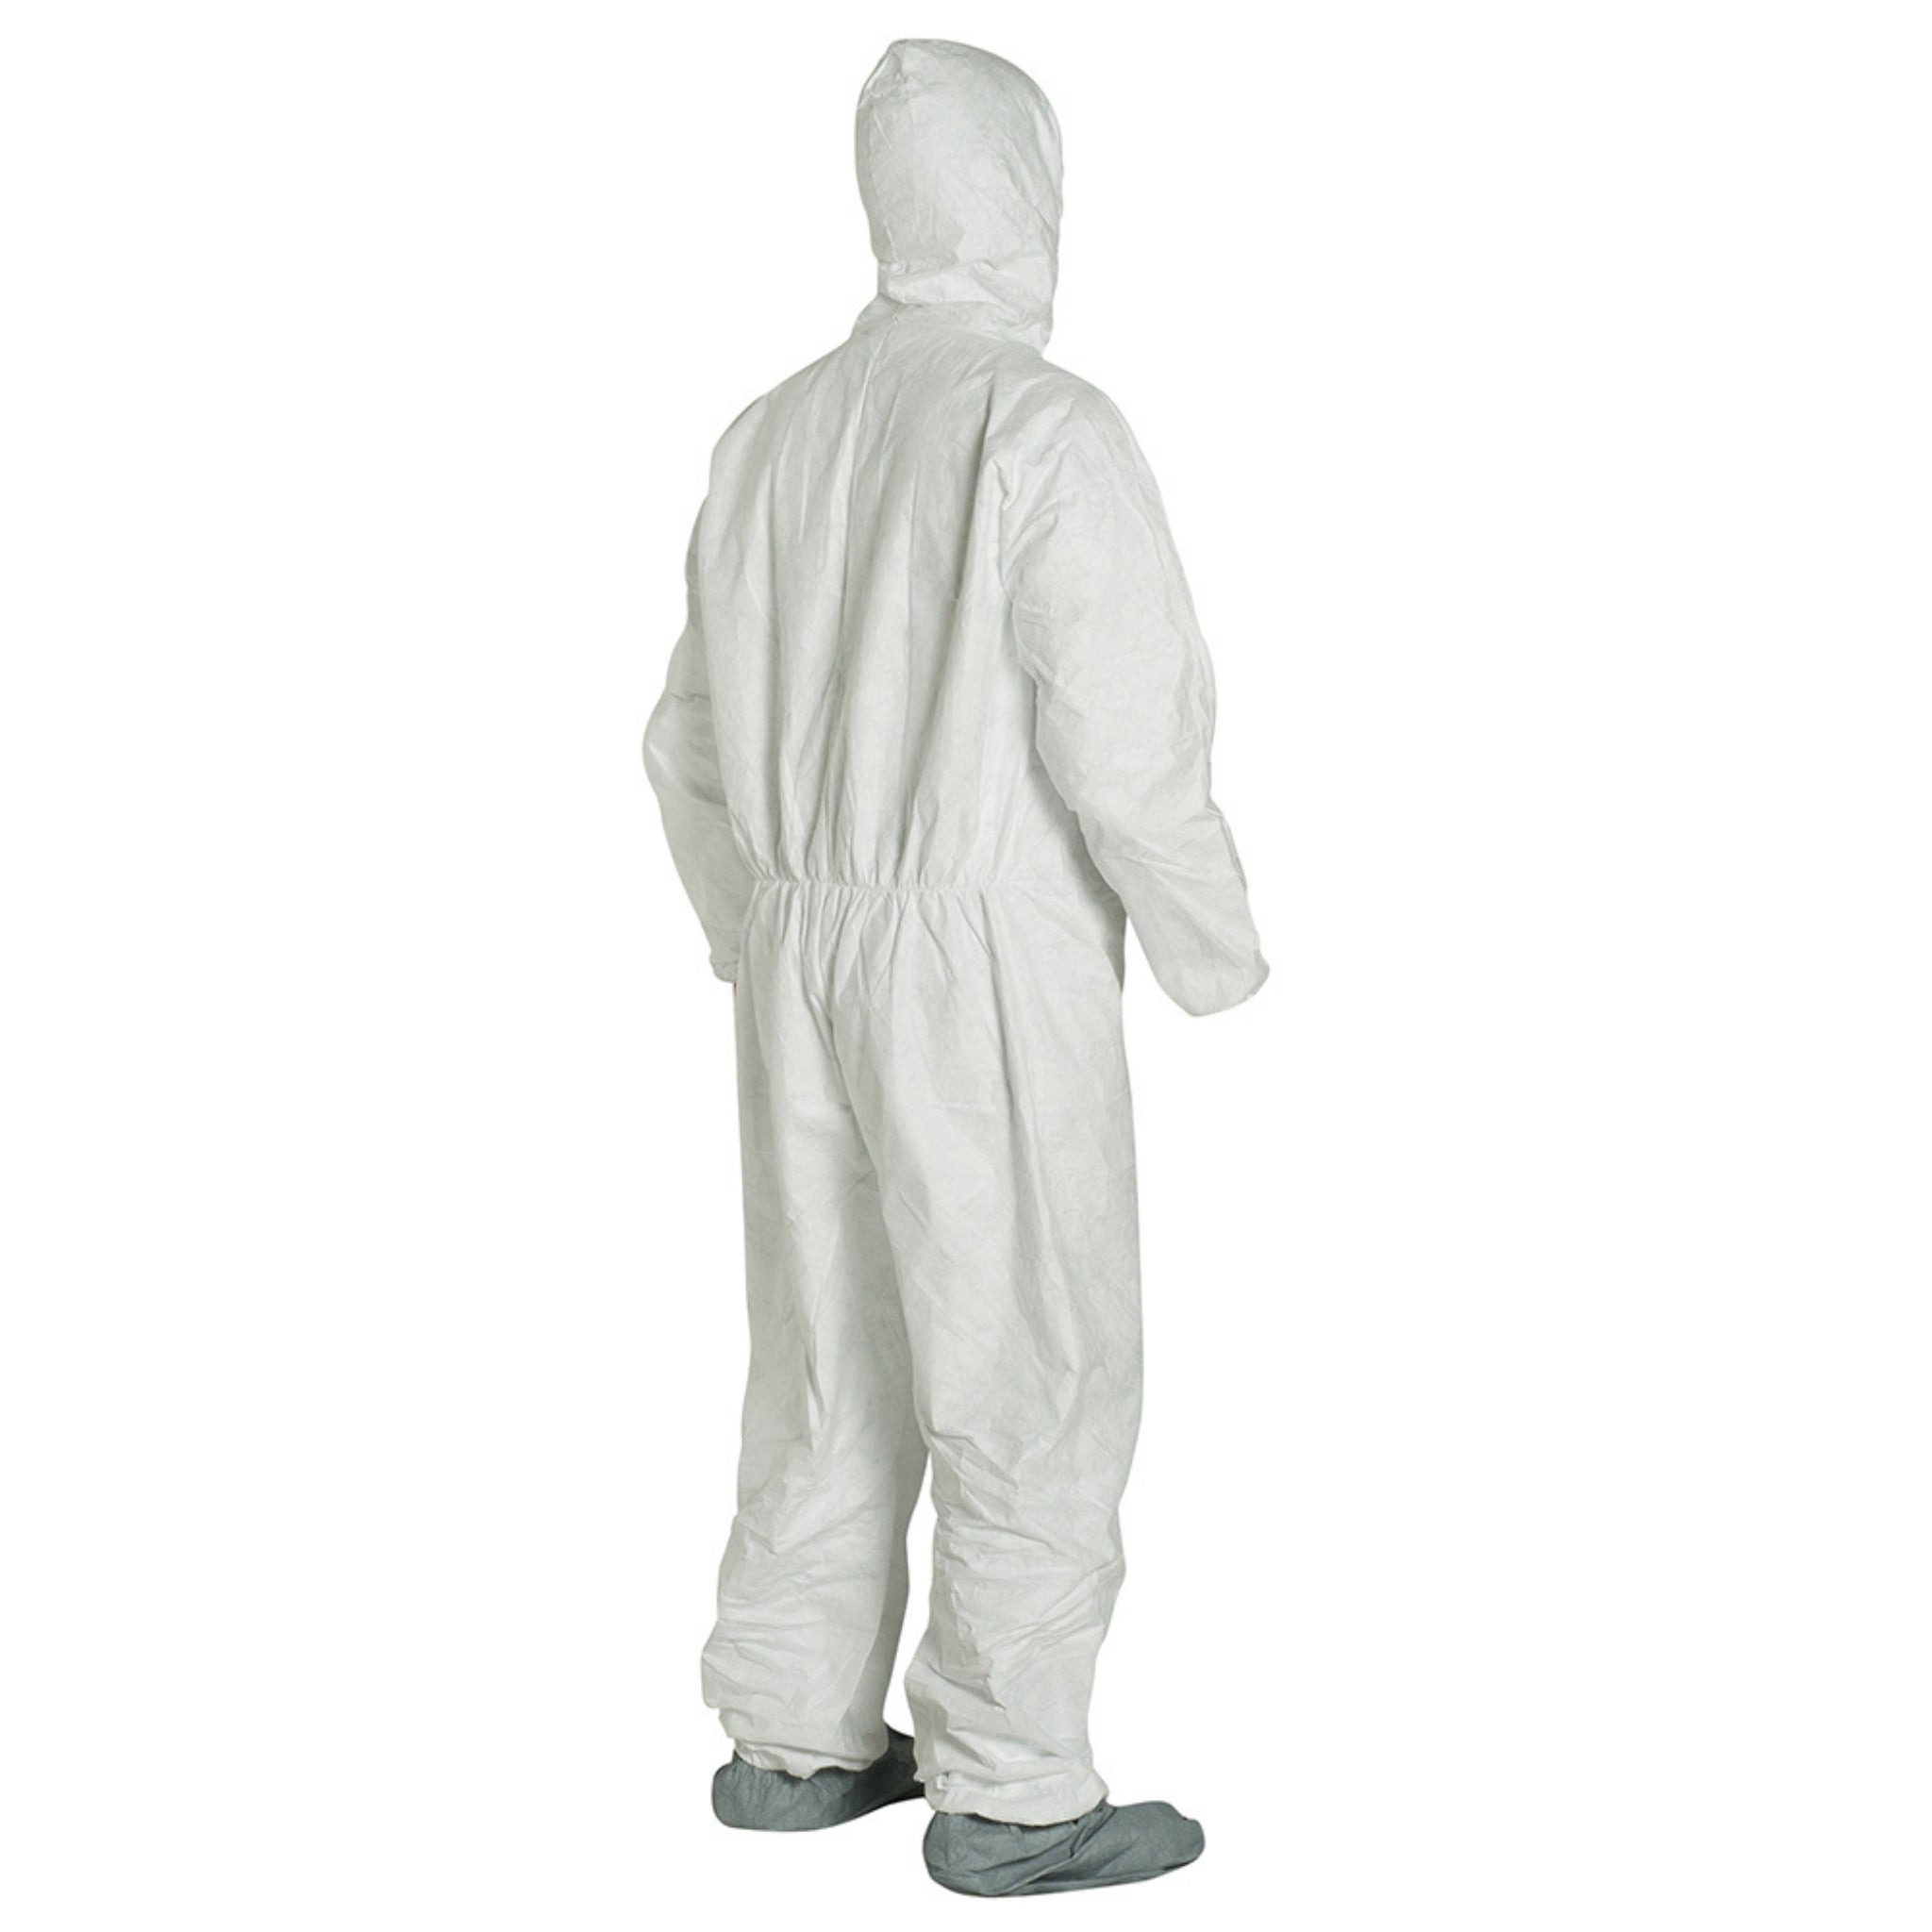 DuPont TY122S- Case of 25: Tyvek 400 Disposable Protective Coverall, White